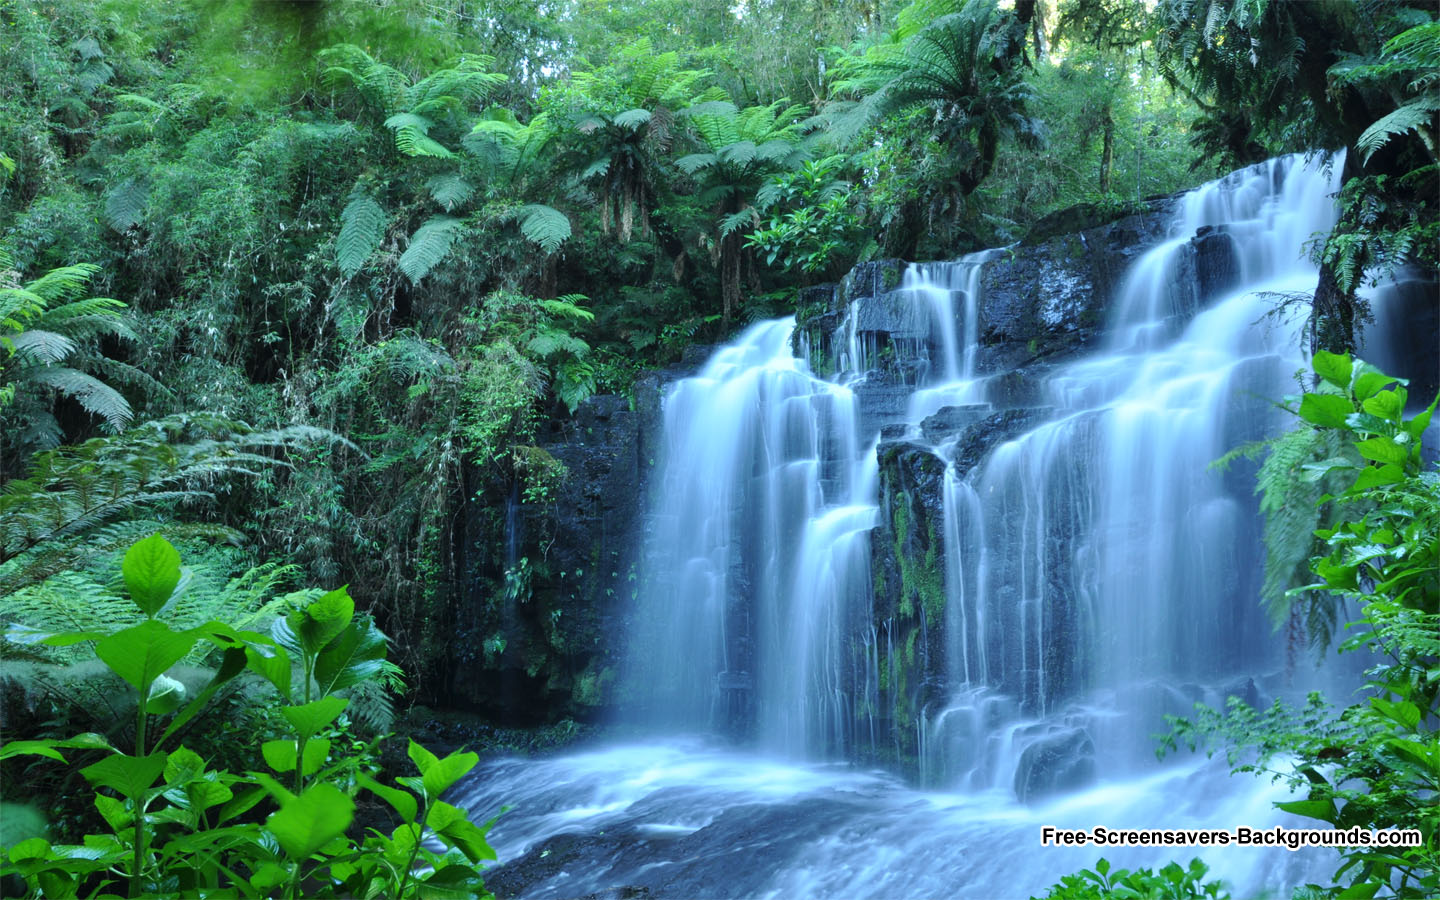  Waterfall Wallpapers Feb 2 2011   Free Screensavers and Backgrounds